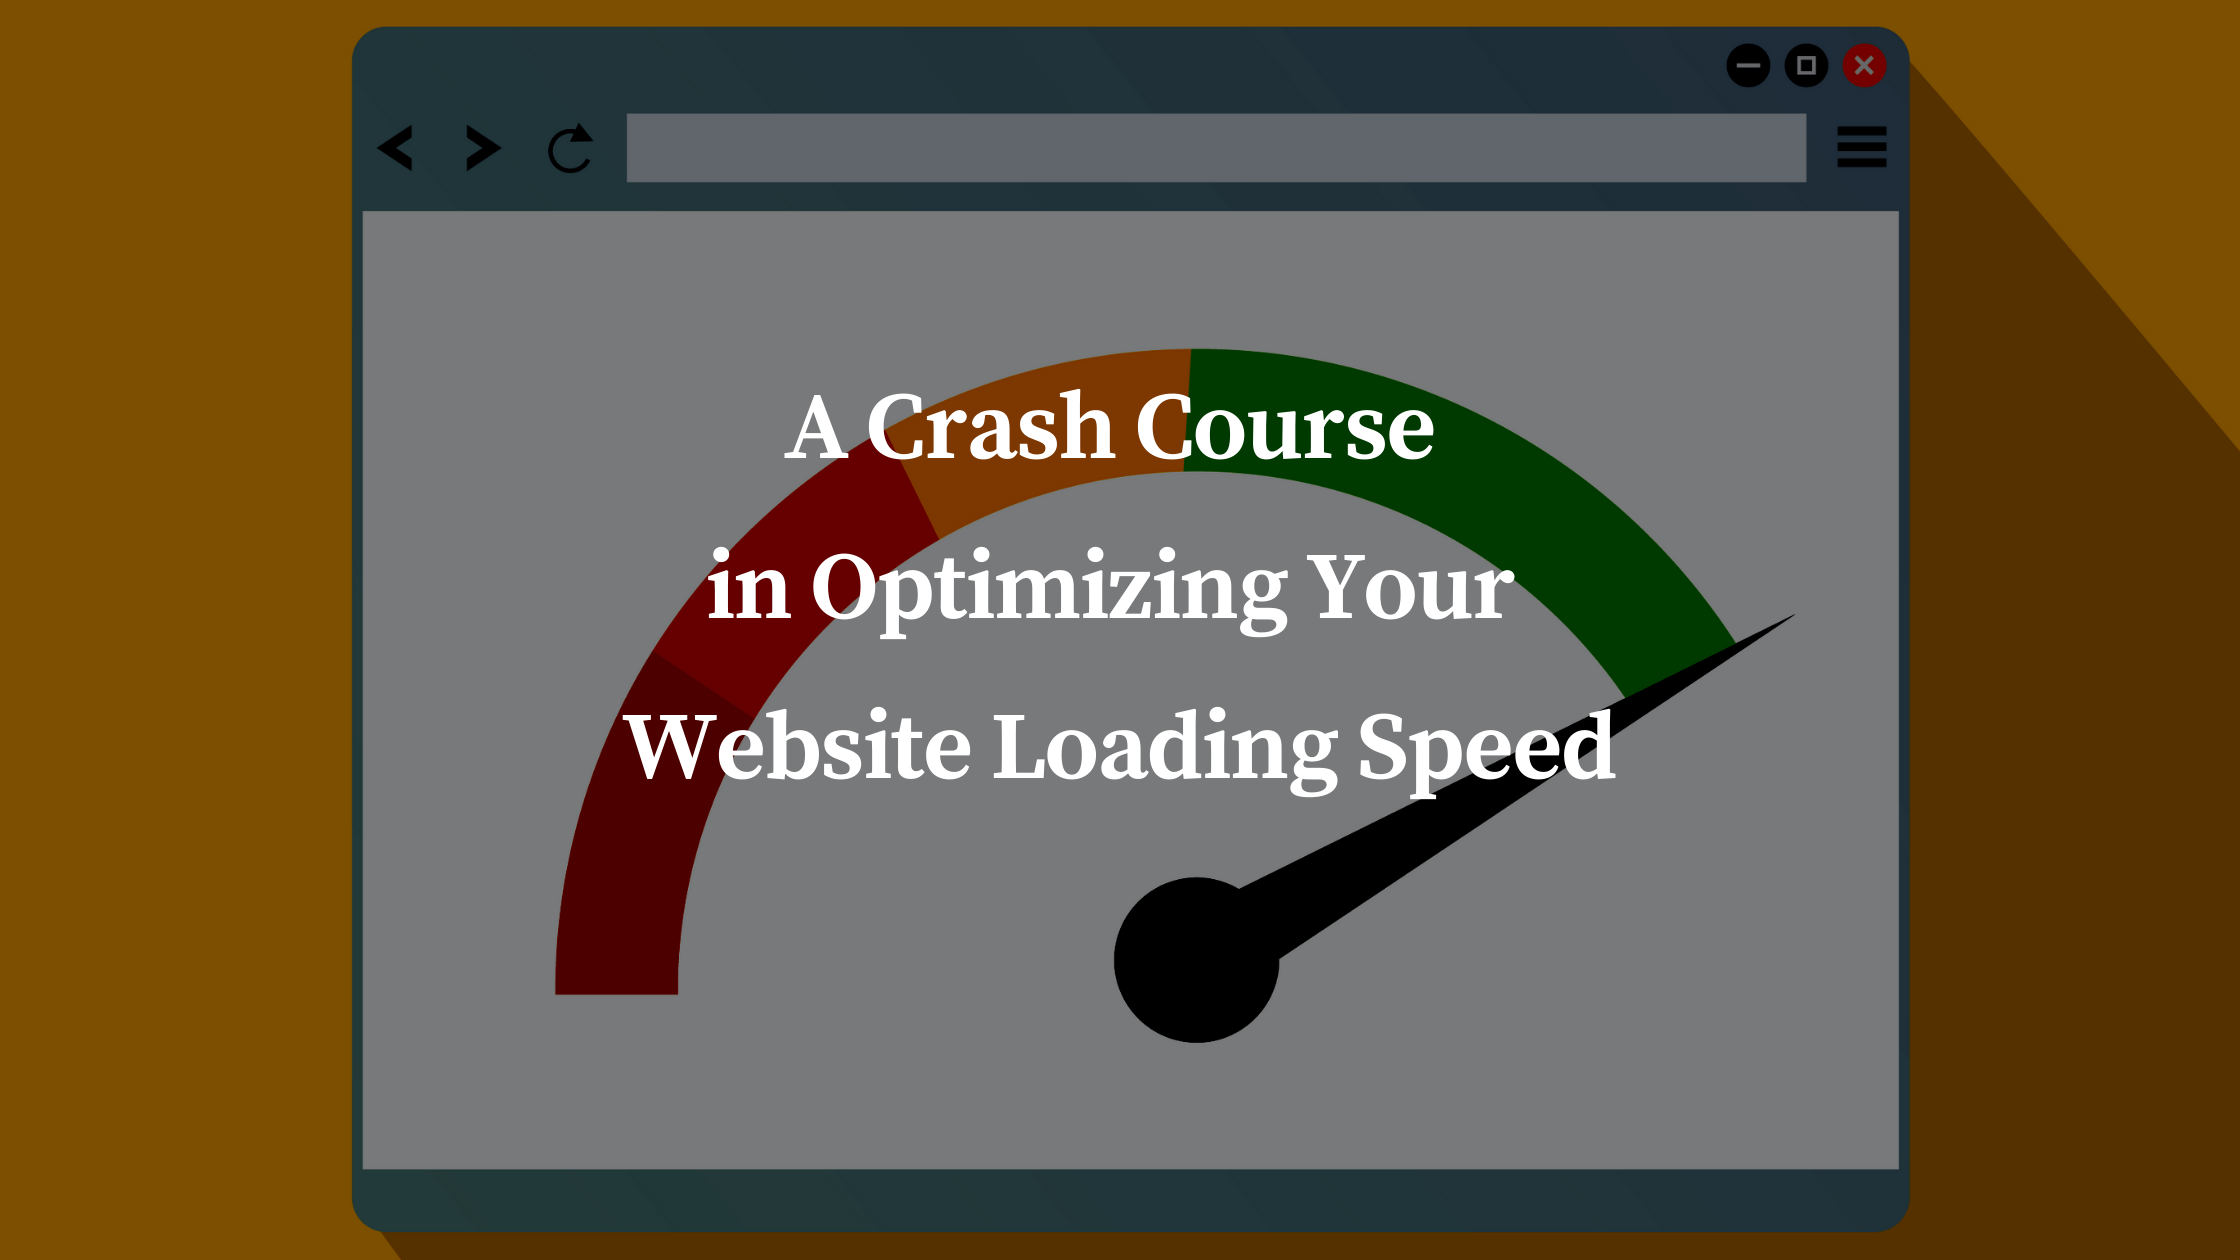 A Crash Course in Optimizing Your Website Loading Speed